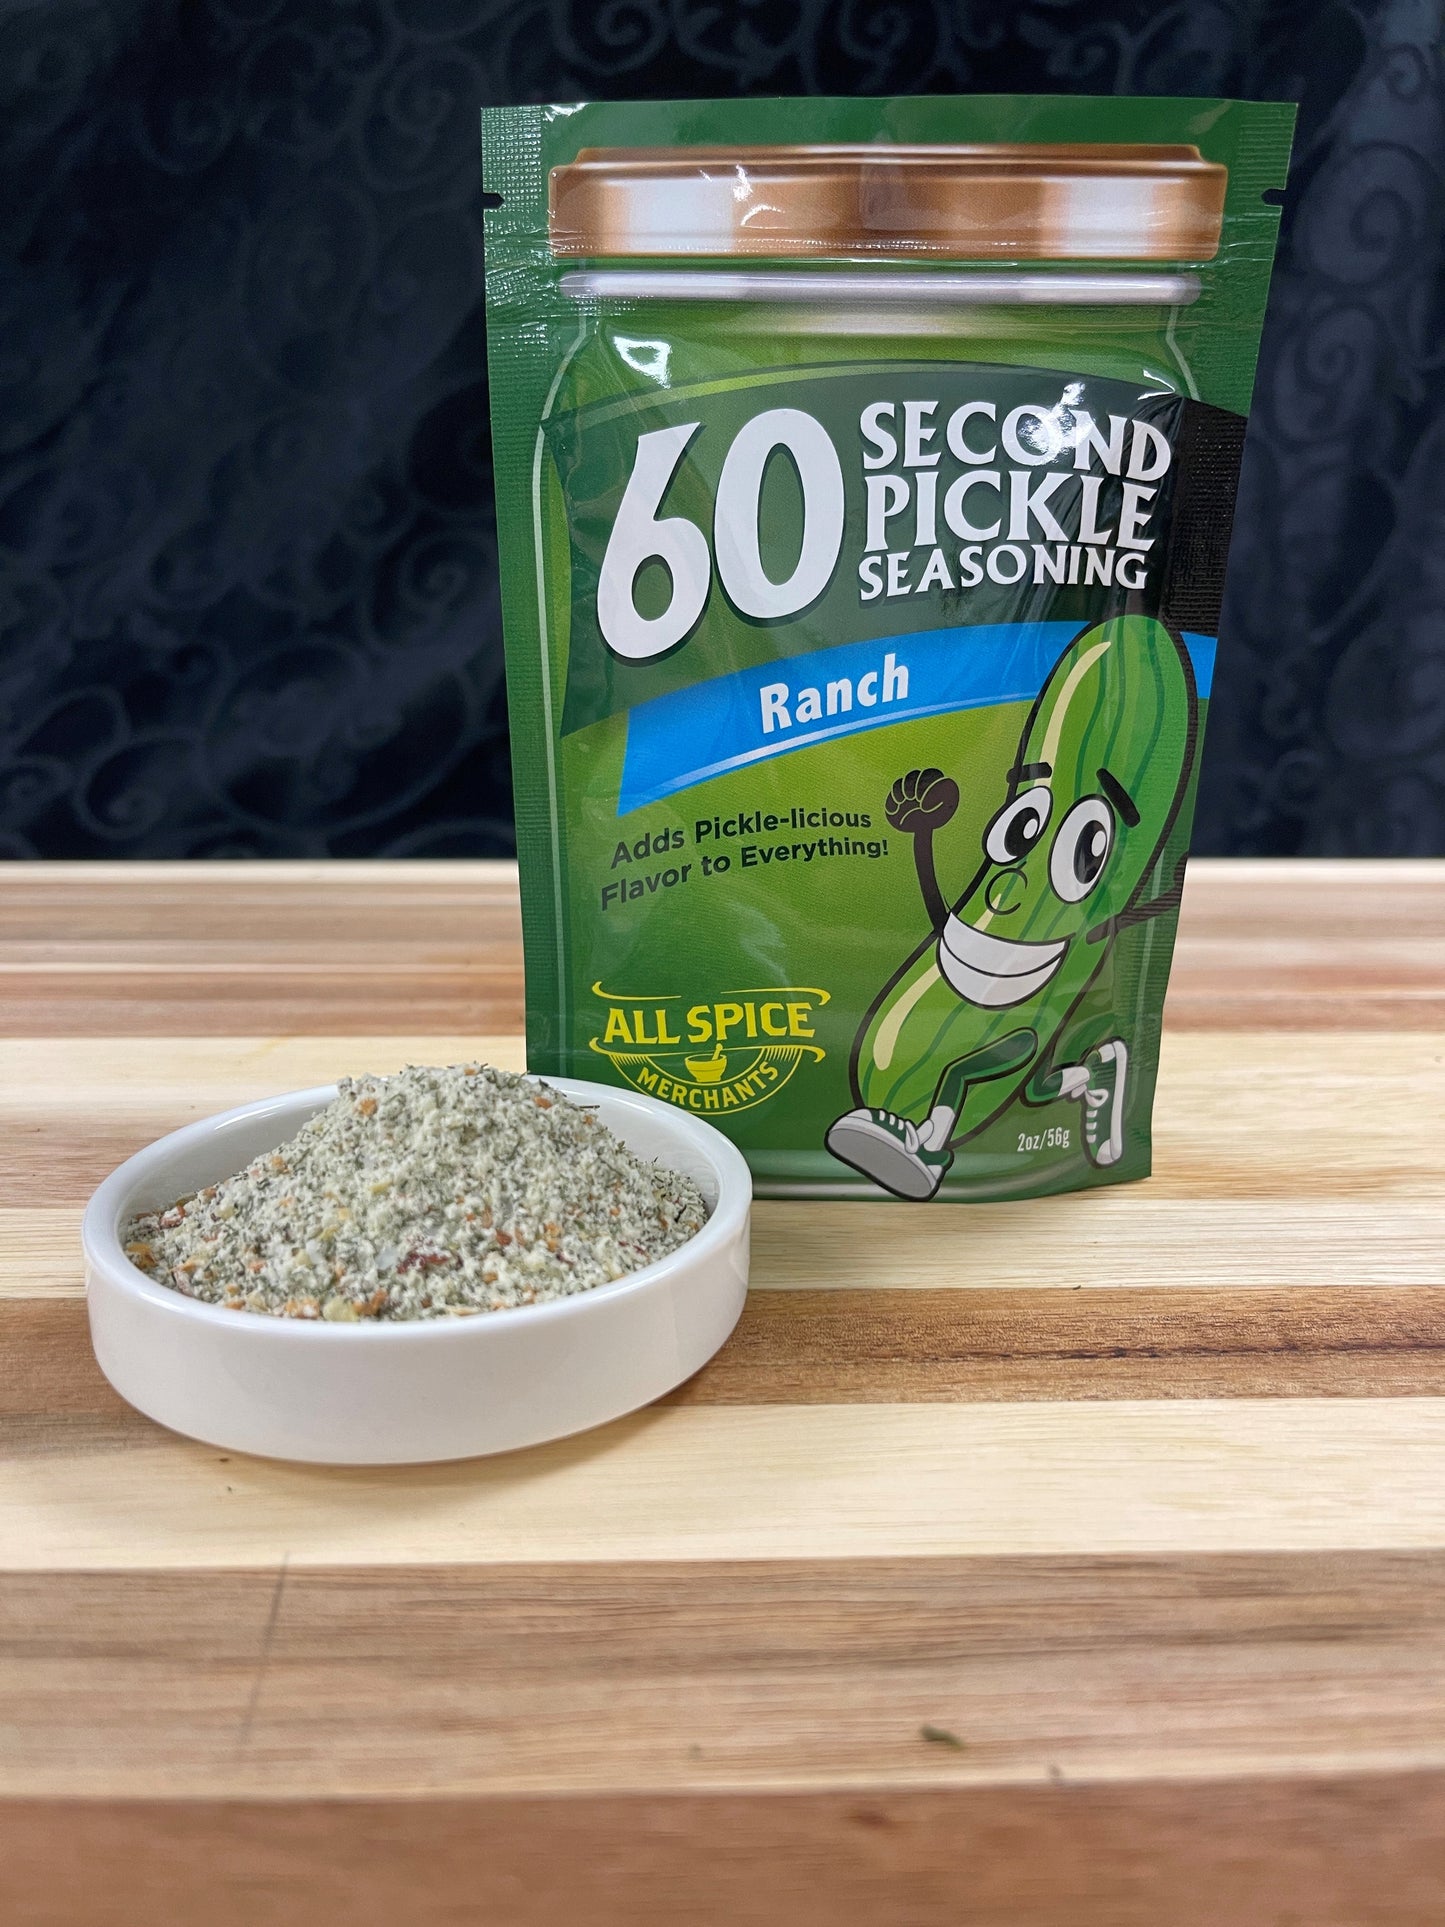 60-Second Pickle - Ranch